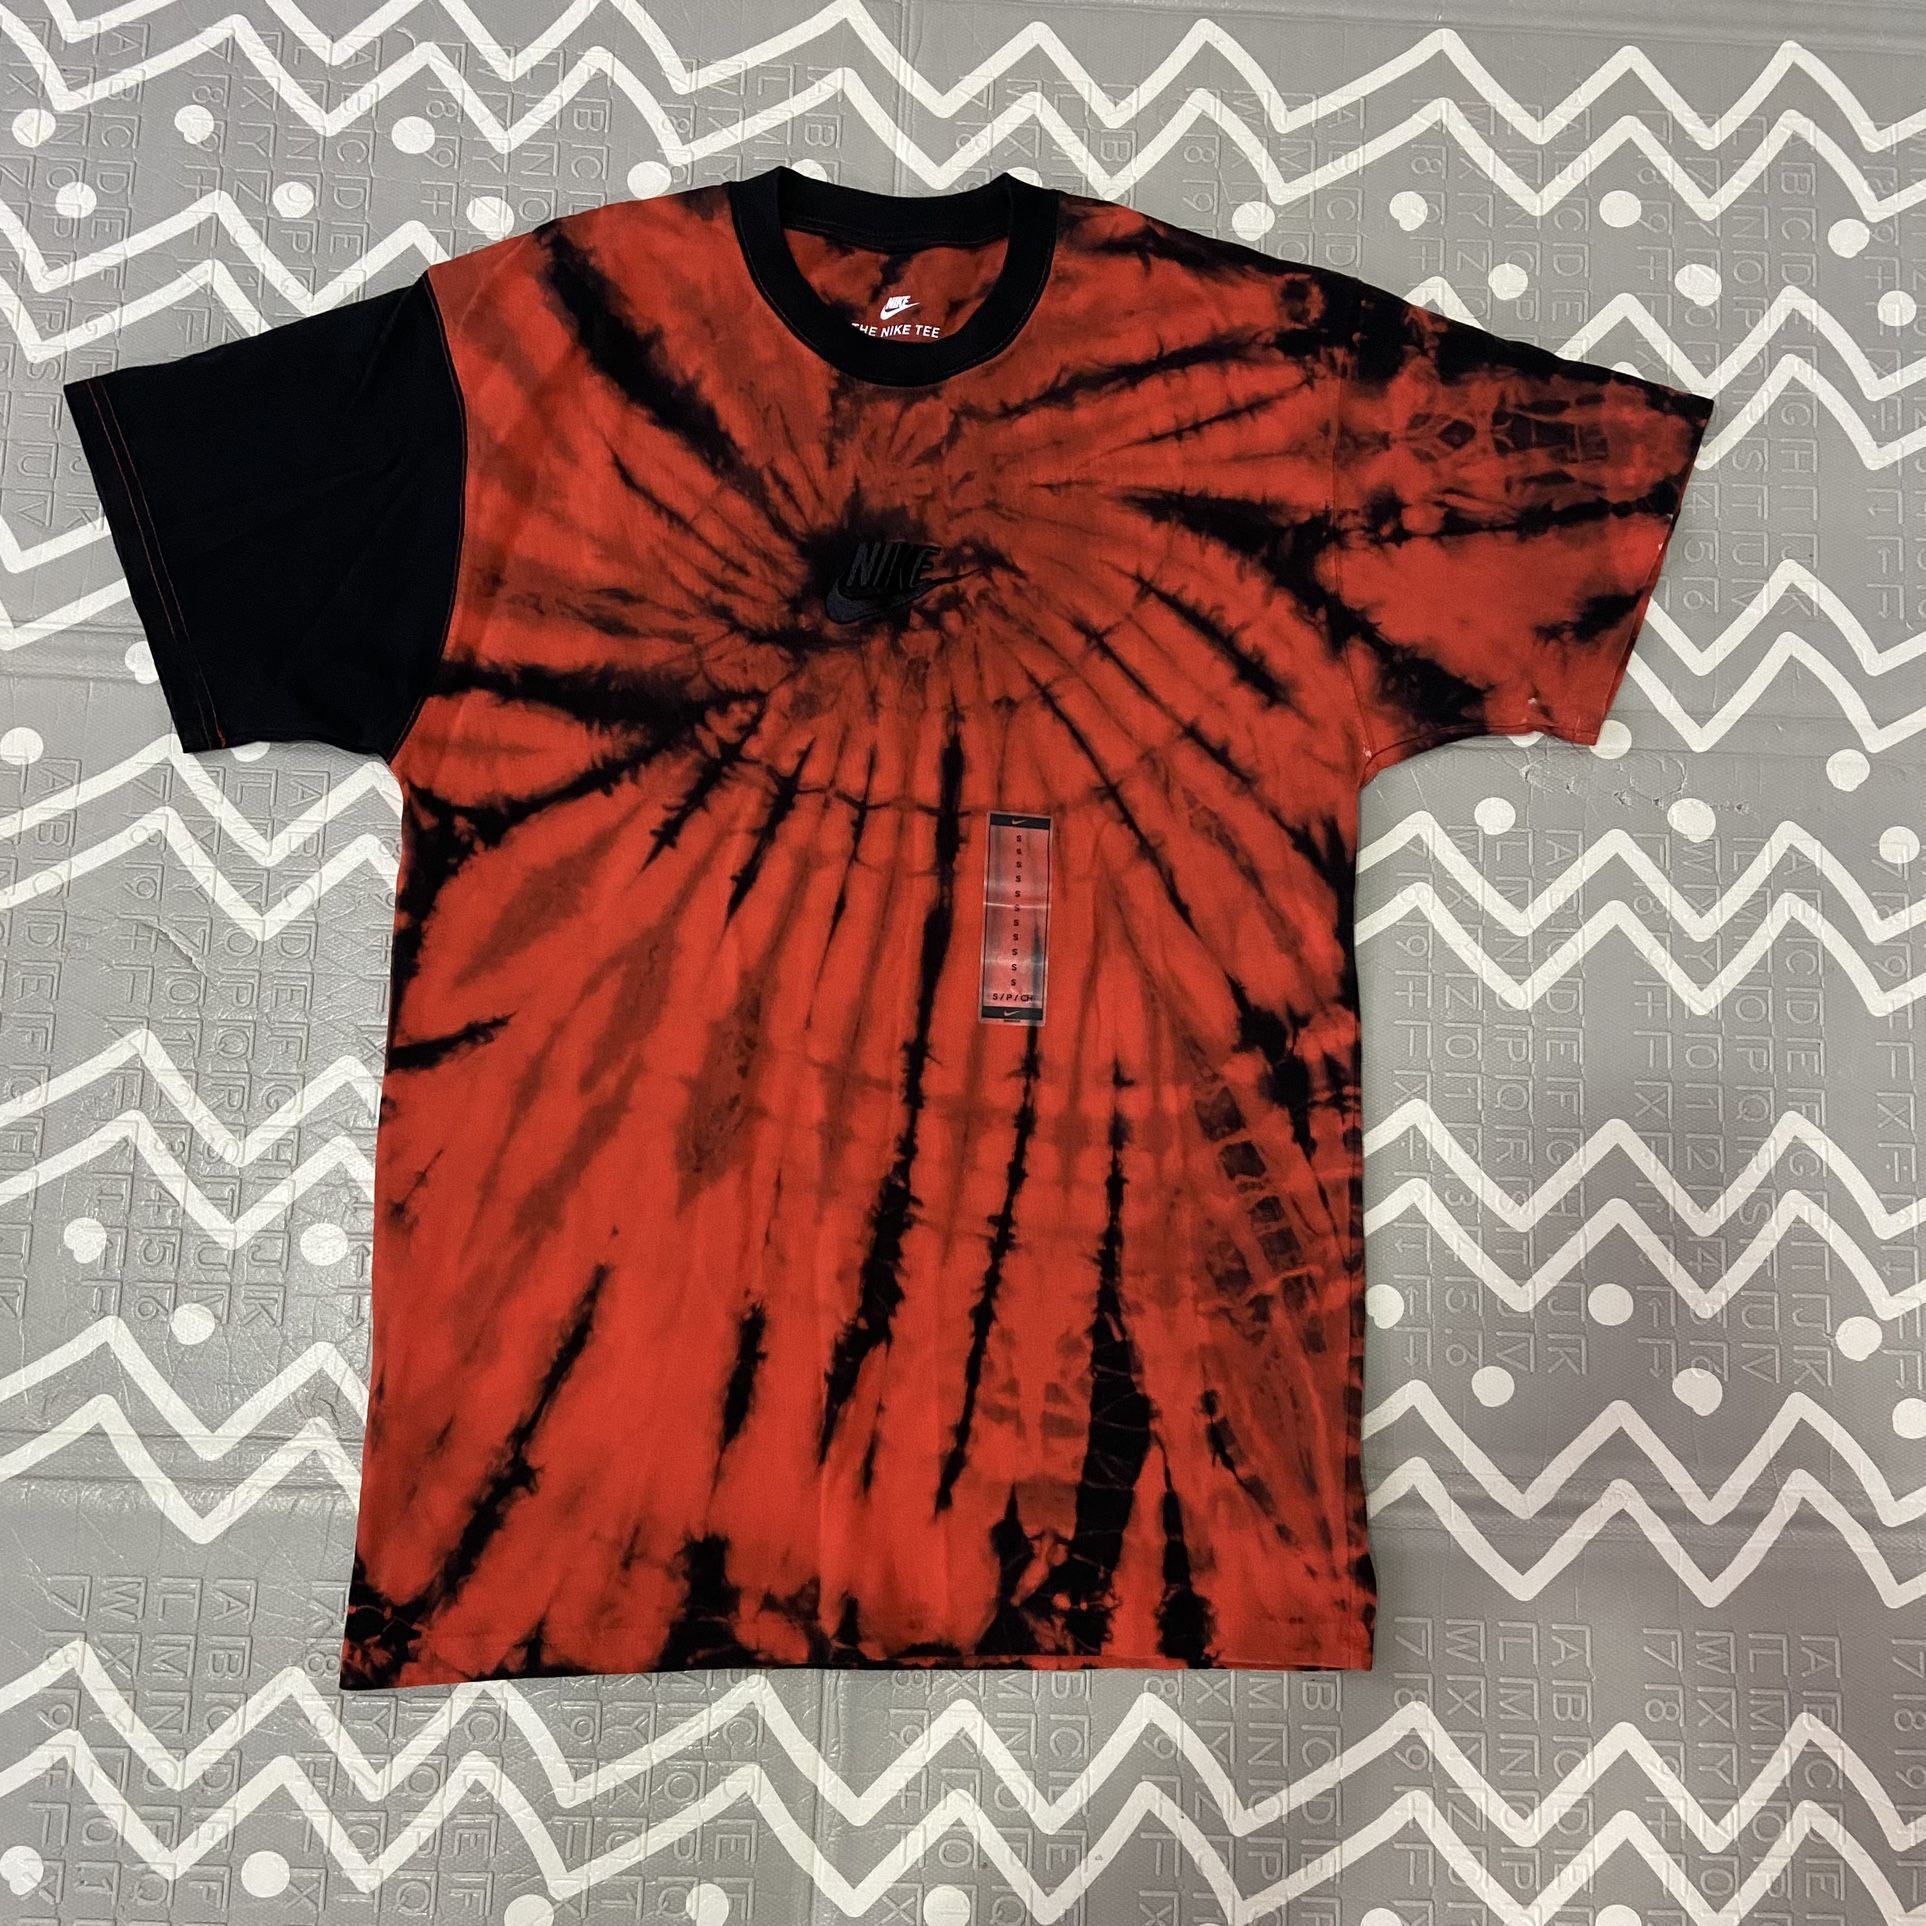 Nike special edition tie dye shirt 